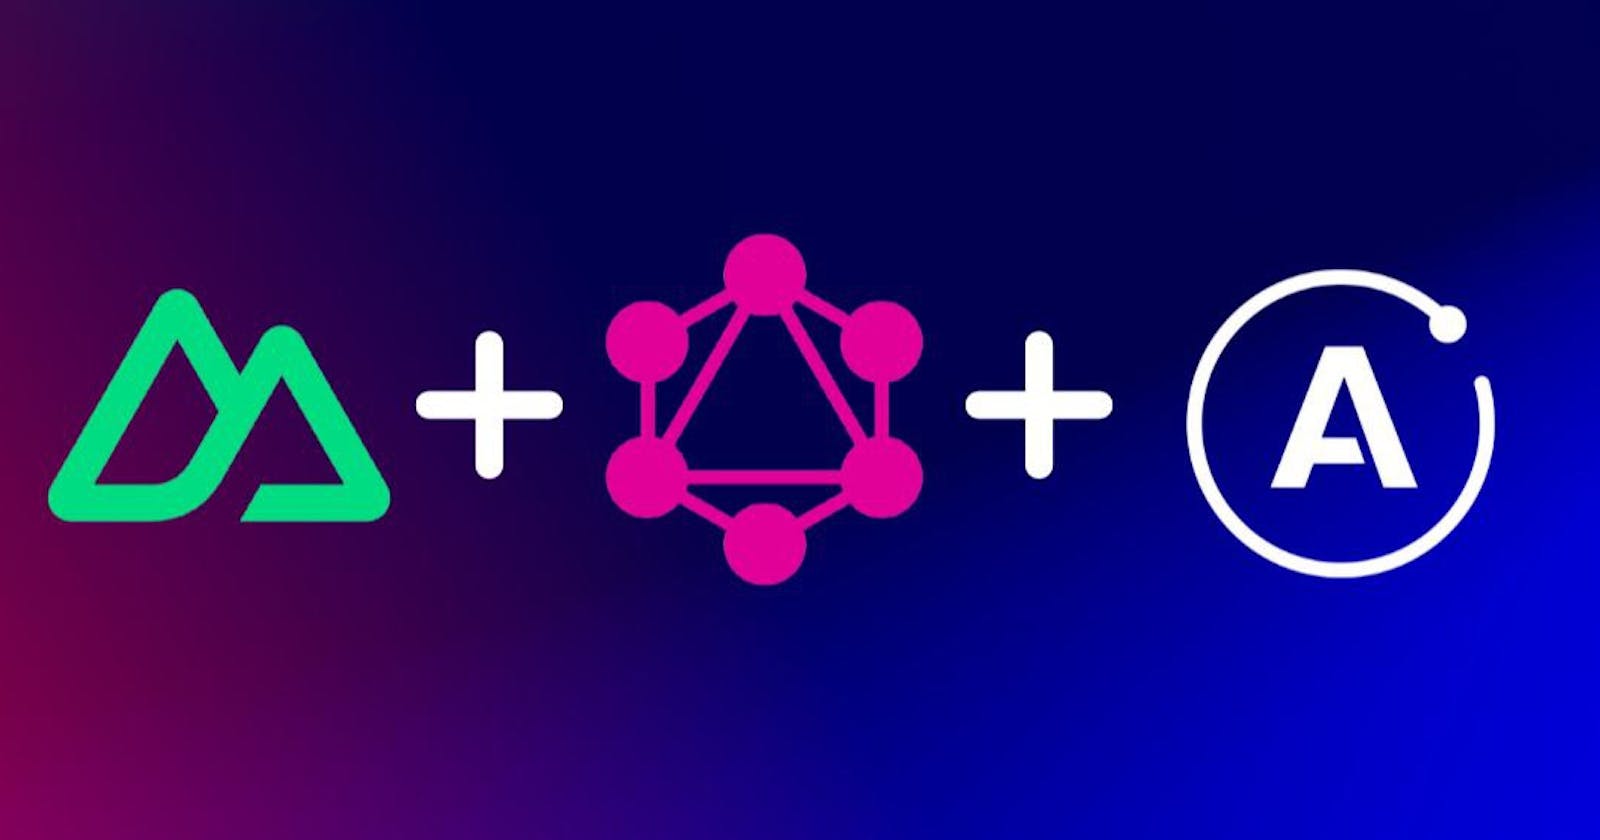 Powering your Nuxt 3 app with Graphql using Nuxt Apollo